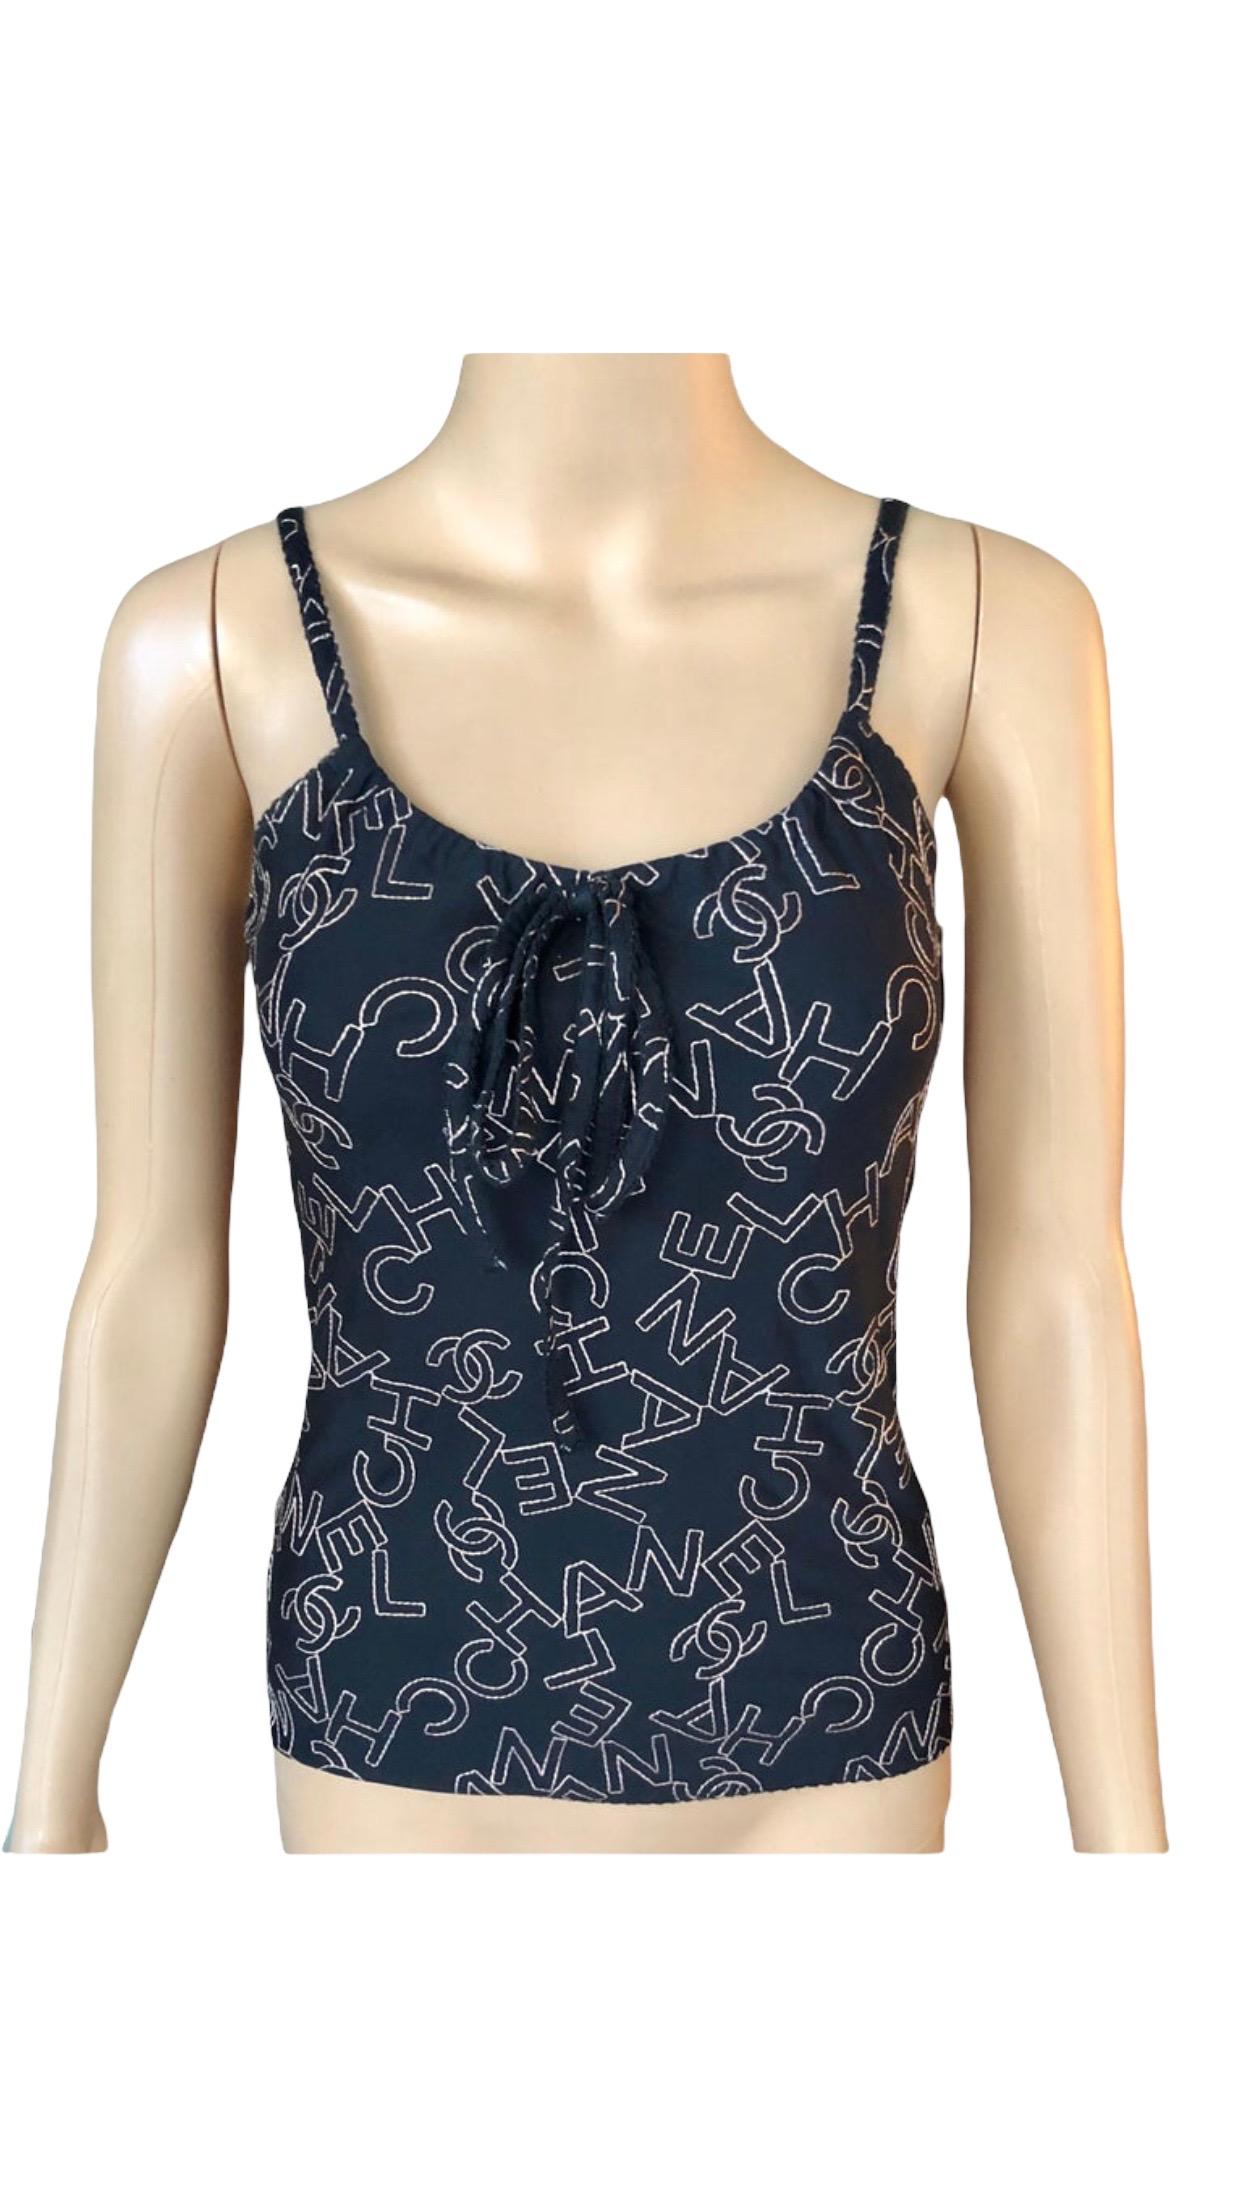 Chanel F/W 2005 Logo Monogram Top  In Excellent Condition For Sale In Naples, FL